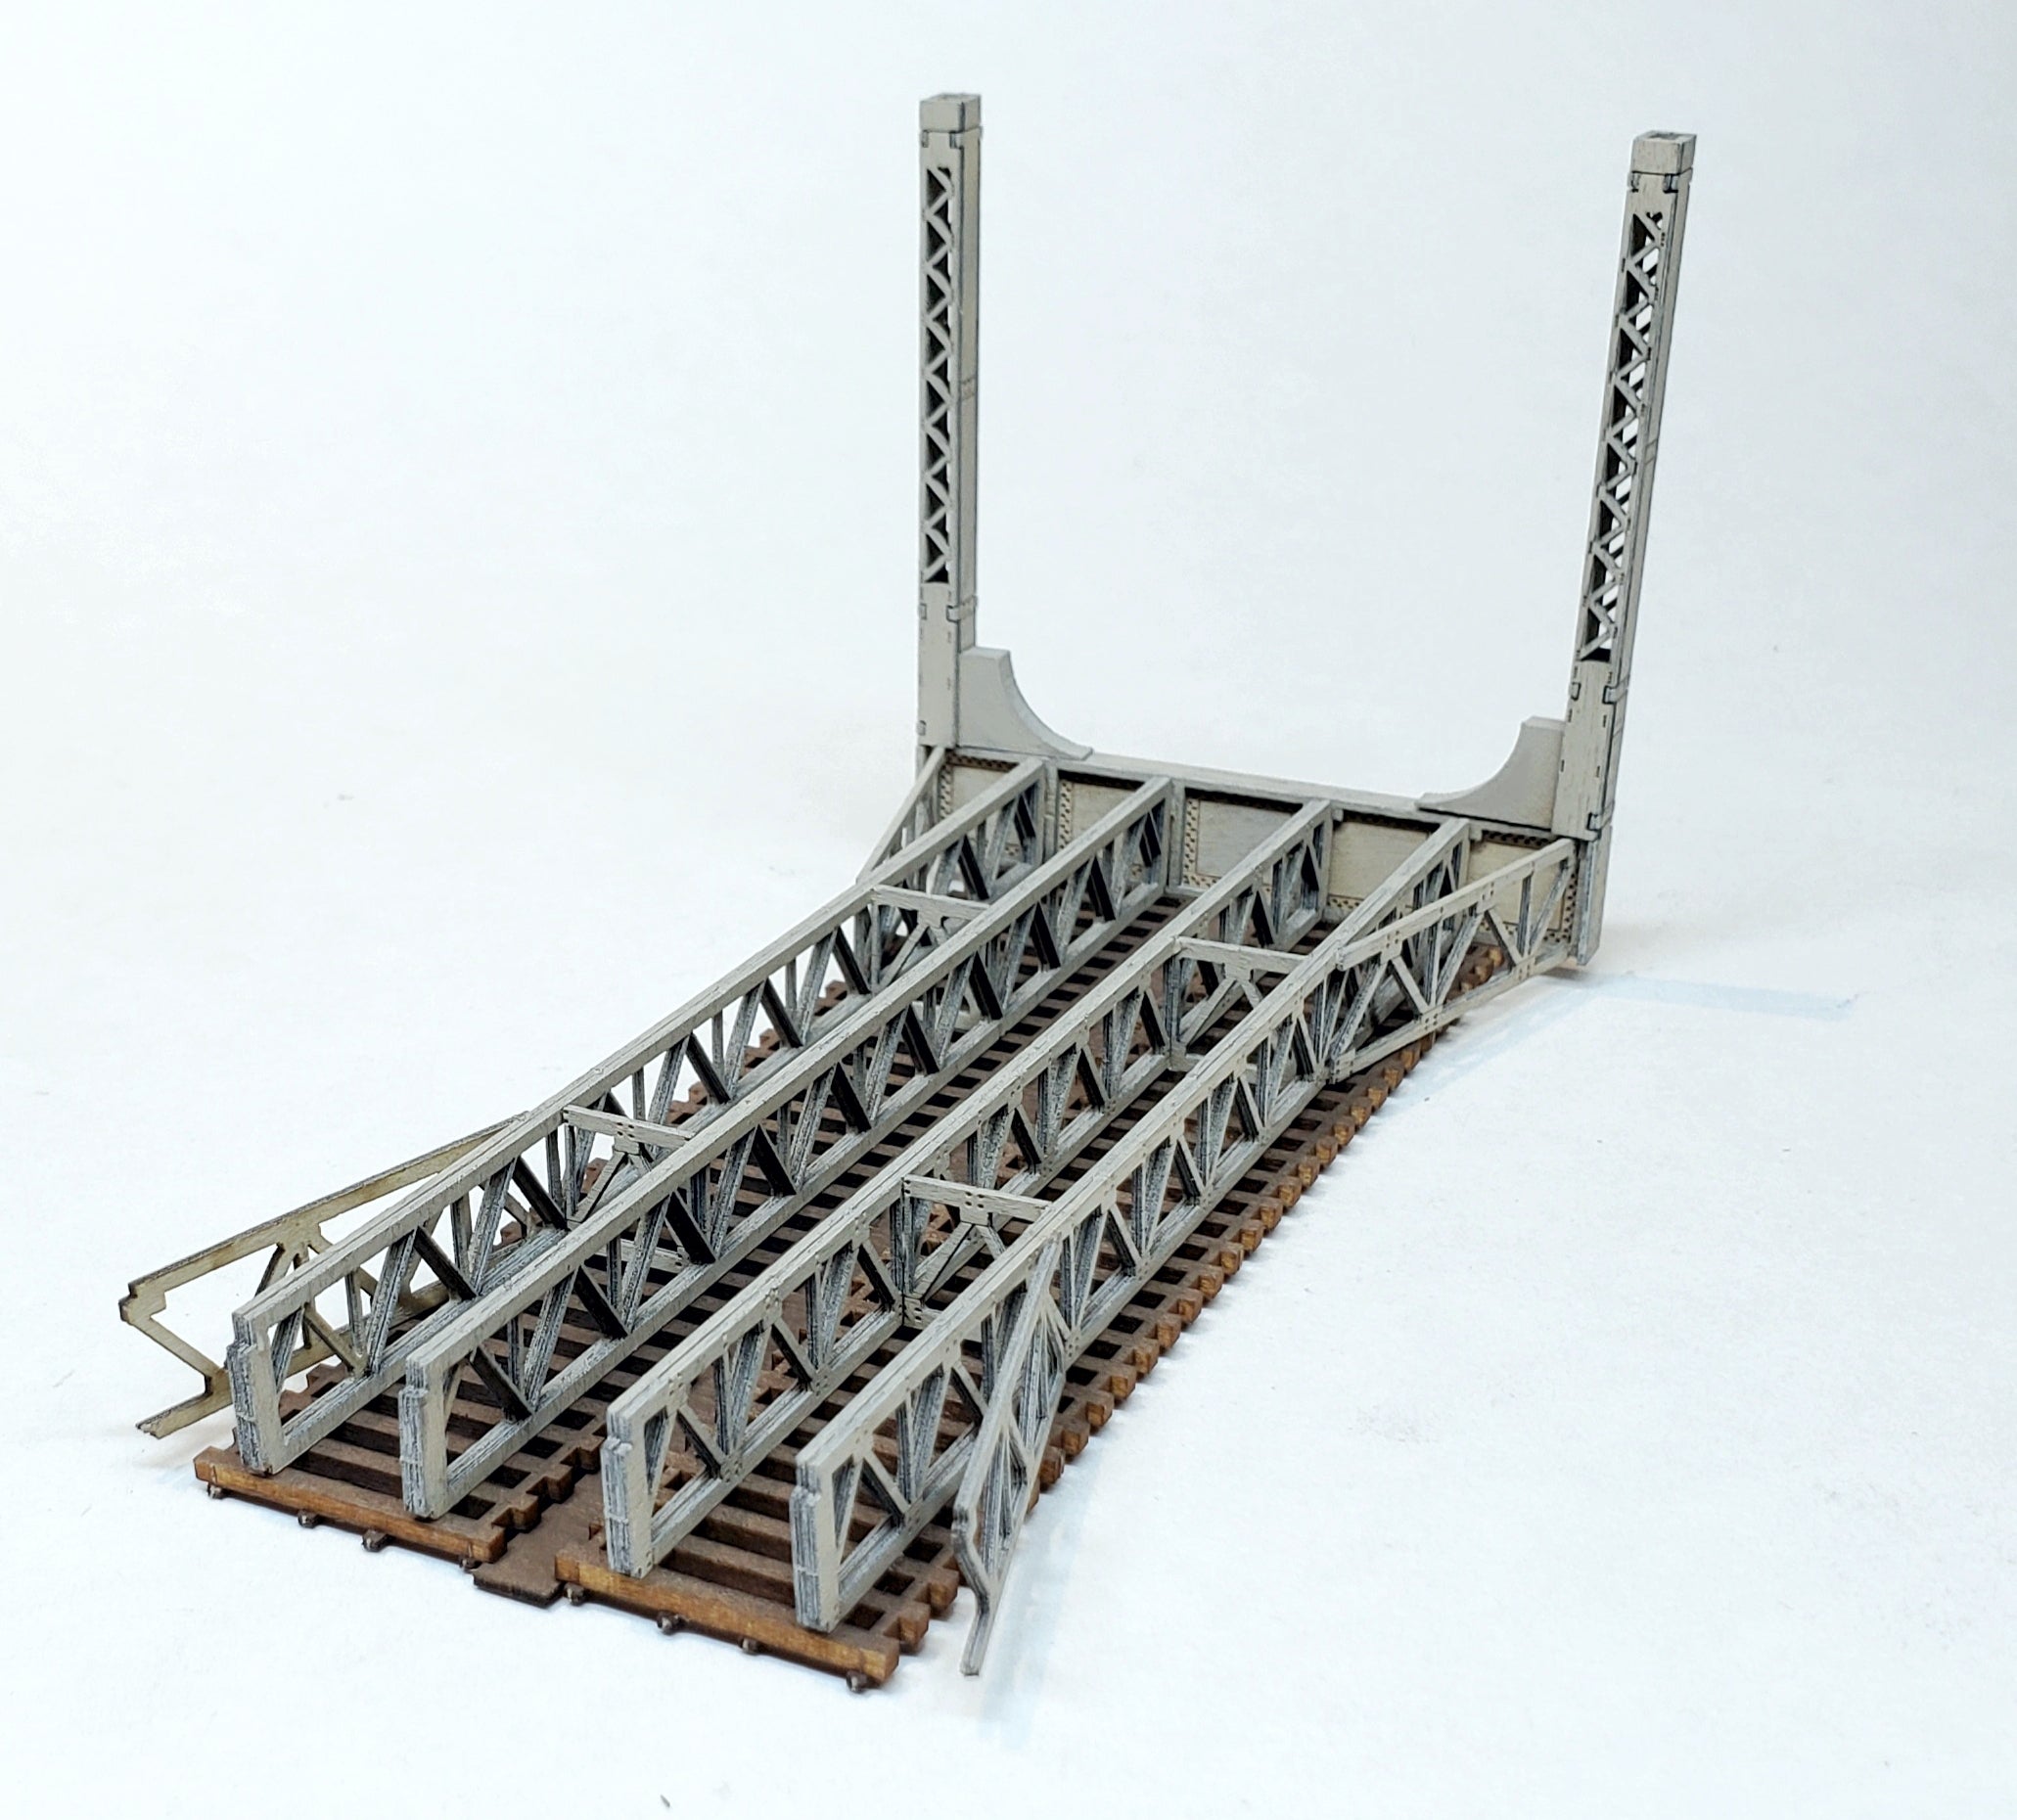 N scale "Chicago style" - 2 Track "Extension" Kit - ITLA